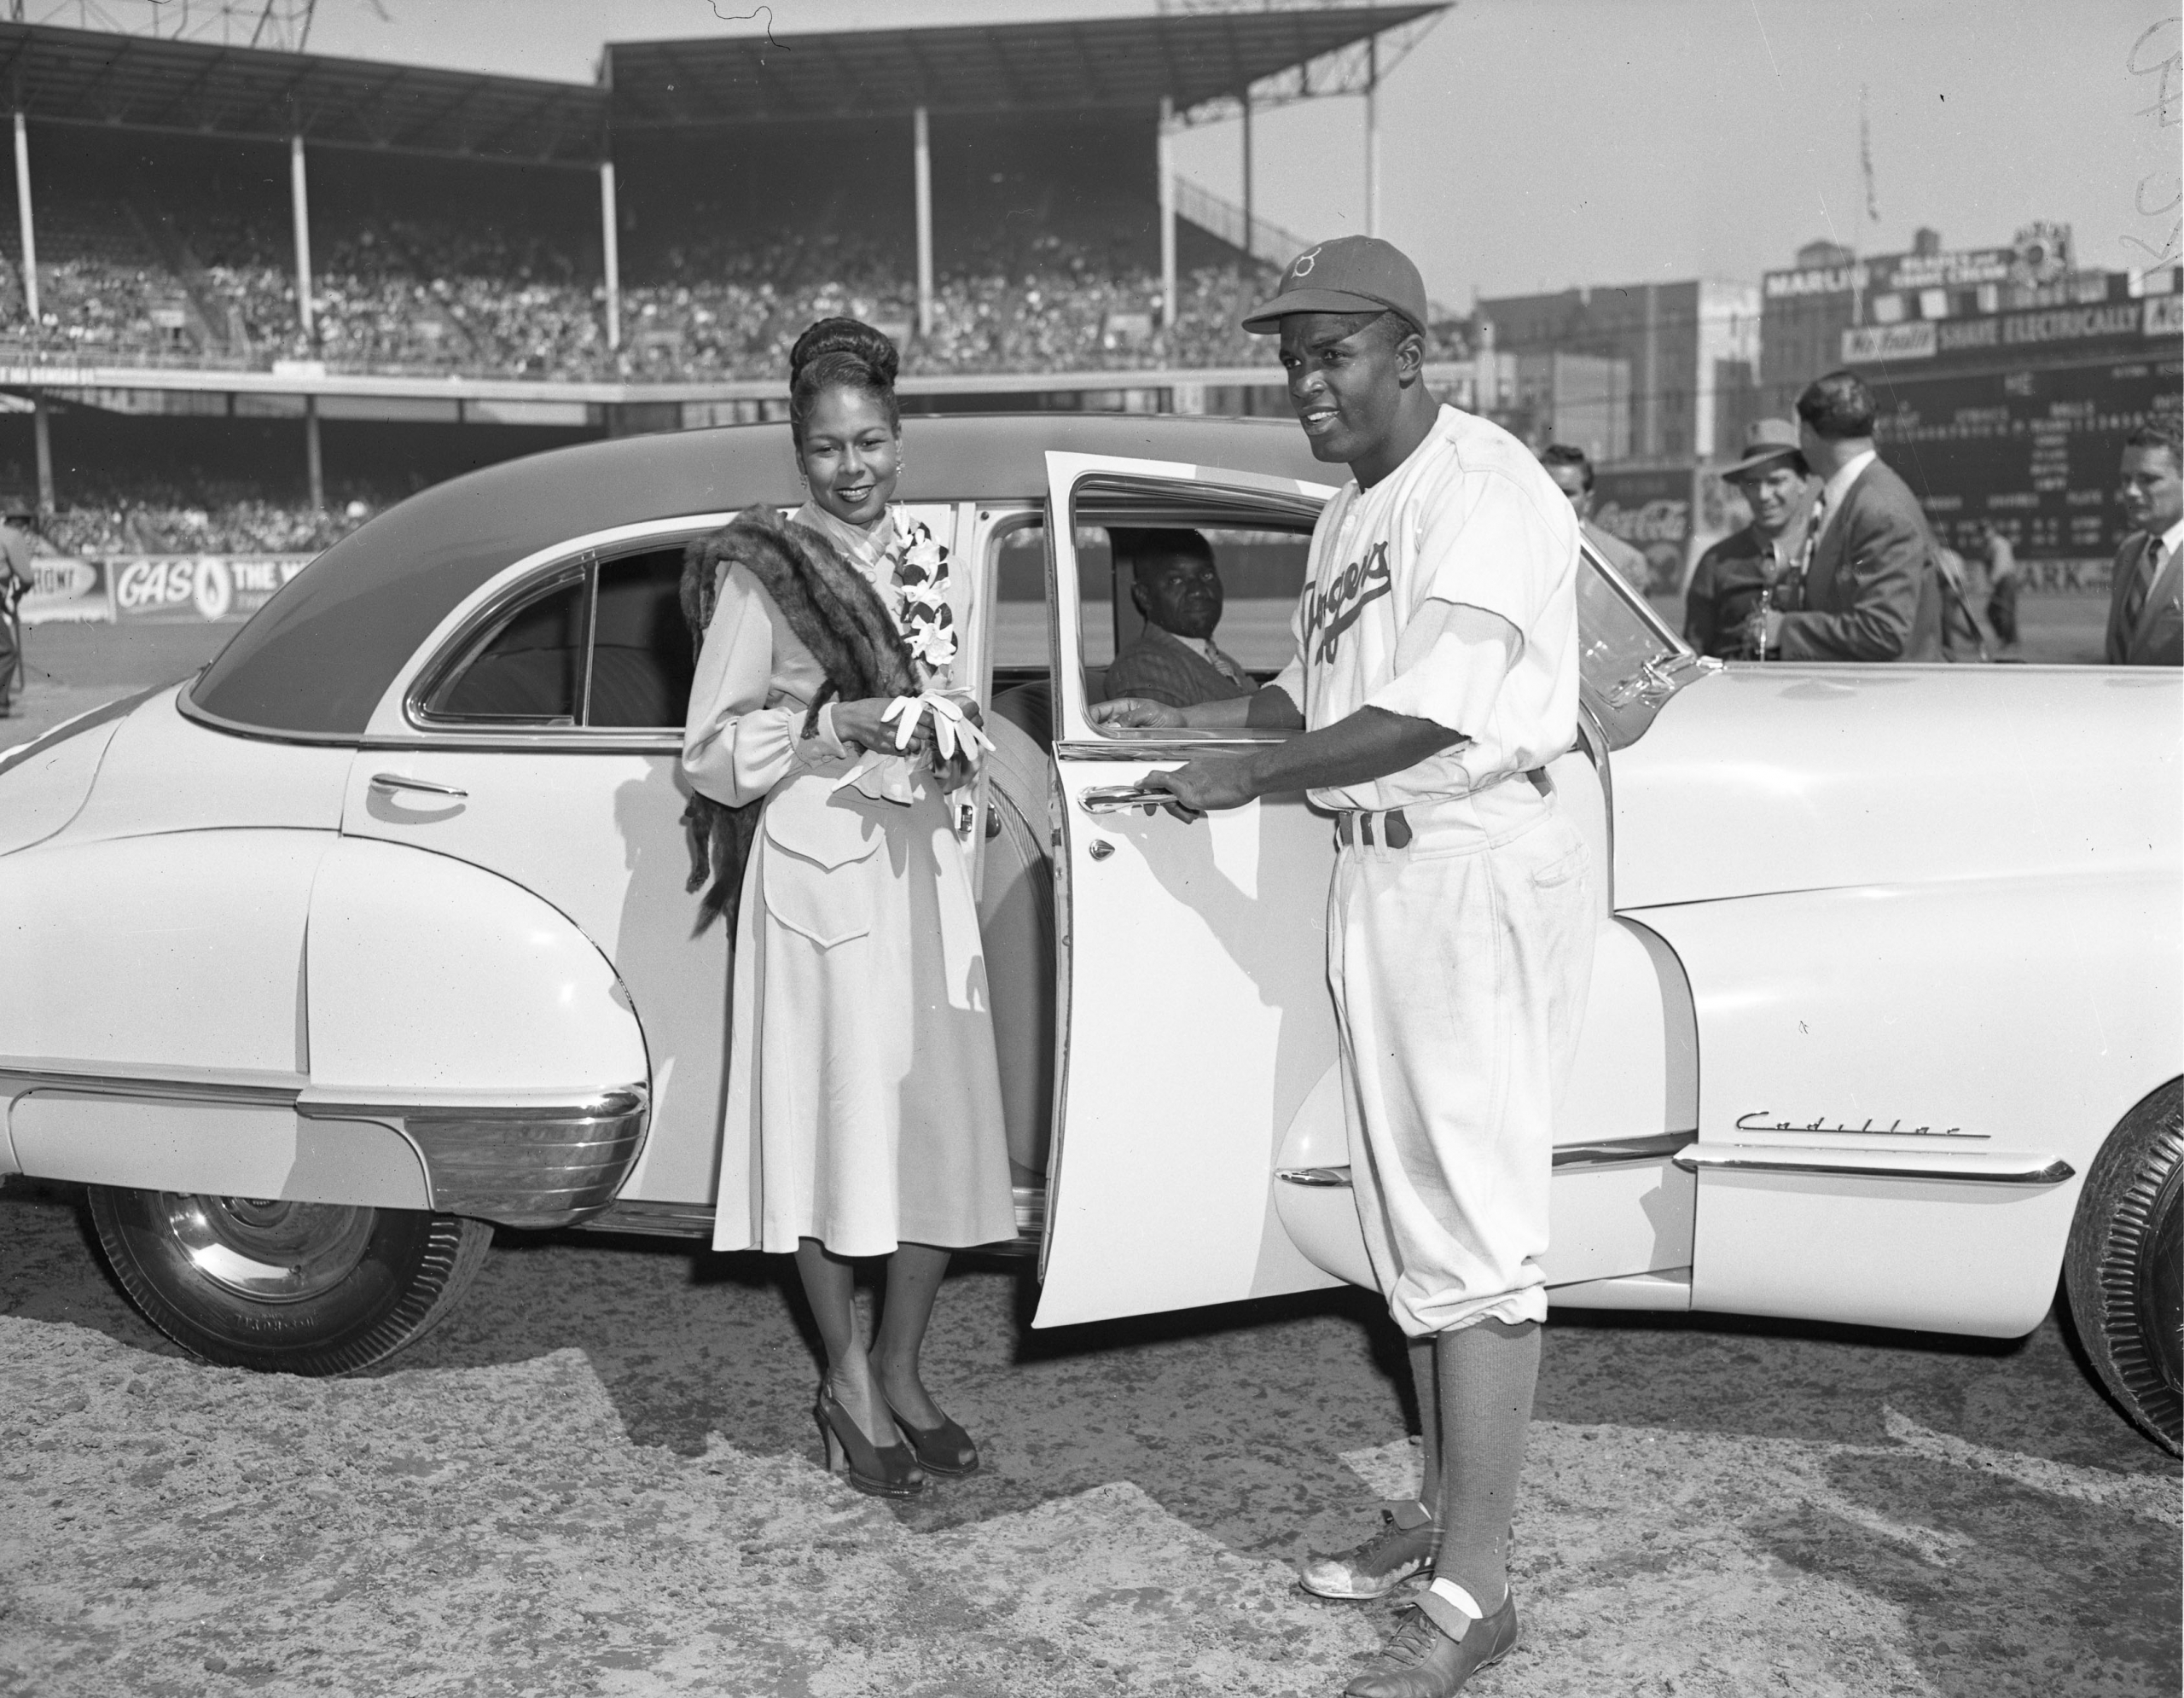 Jackie Robinson and his wife, Rachel, pose for photographs after a special award ceremony in Ebbets Field, where Robinson was given a new car on Jackie Robinson Day, September 24, 1947 in Brooklyn. (SABR-RUCKER ARCHIVE)